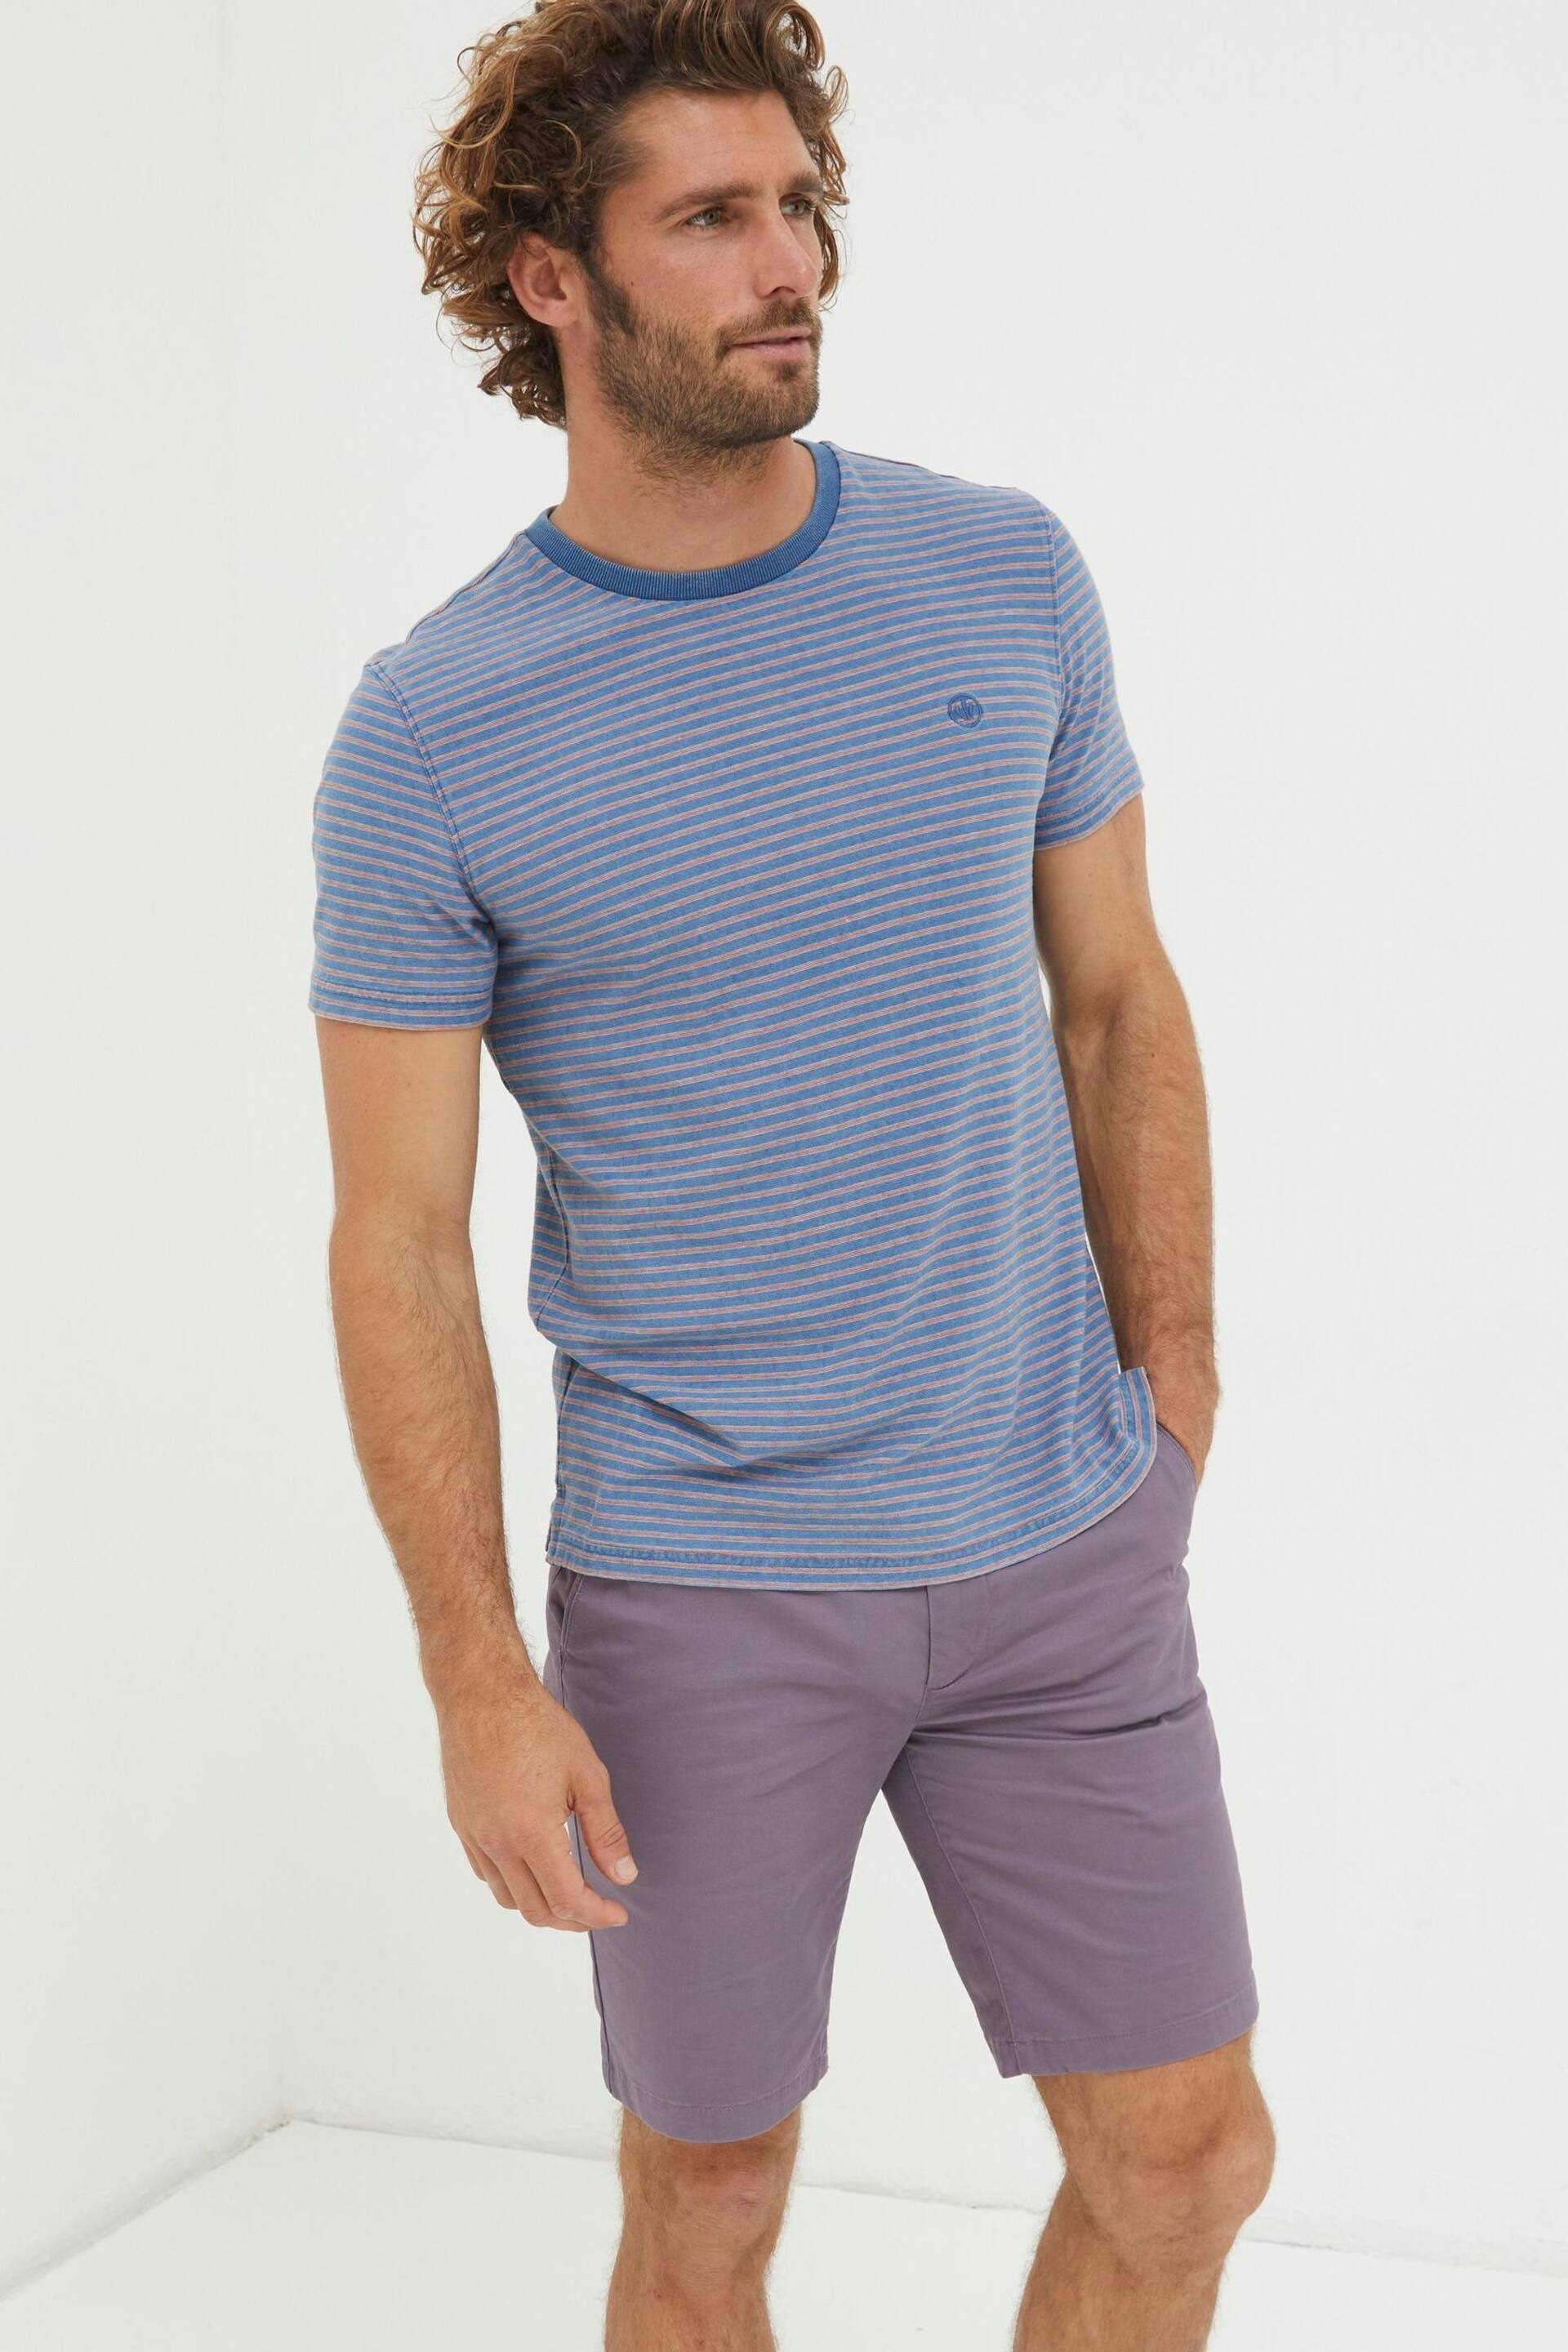 FatFace Purple Mawes Chinos Shorts - Image 3 of 5